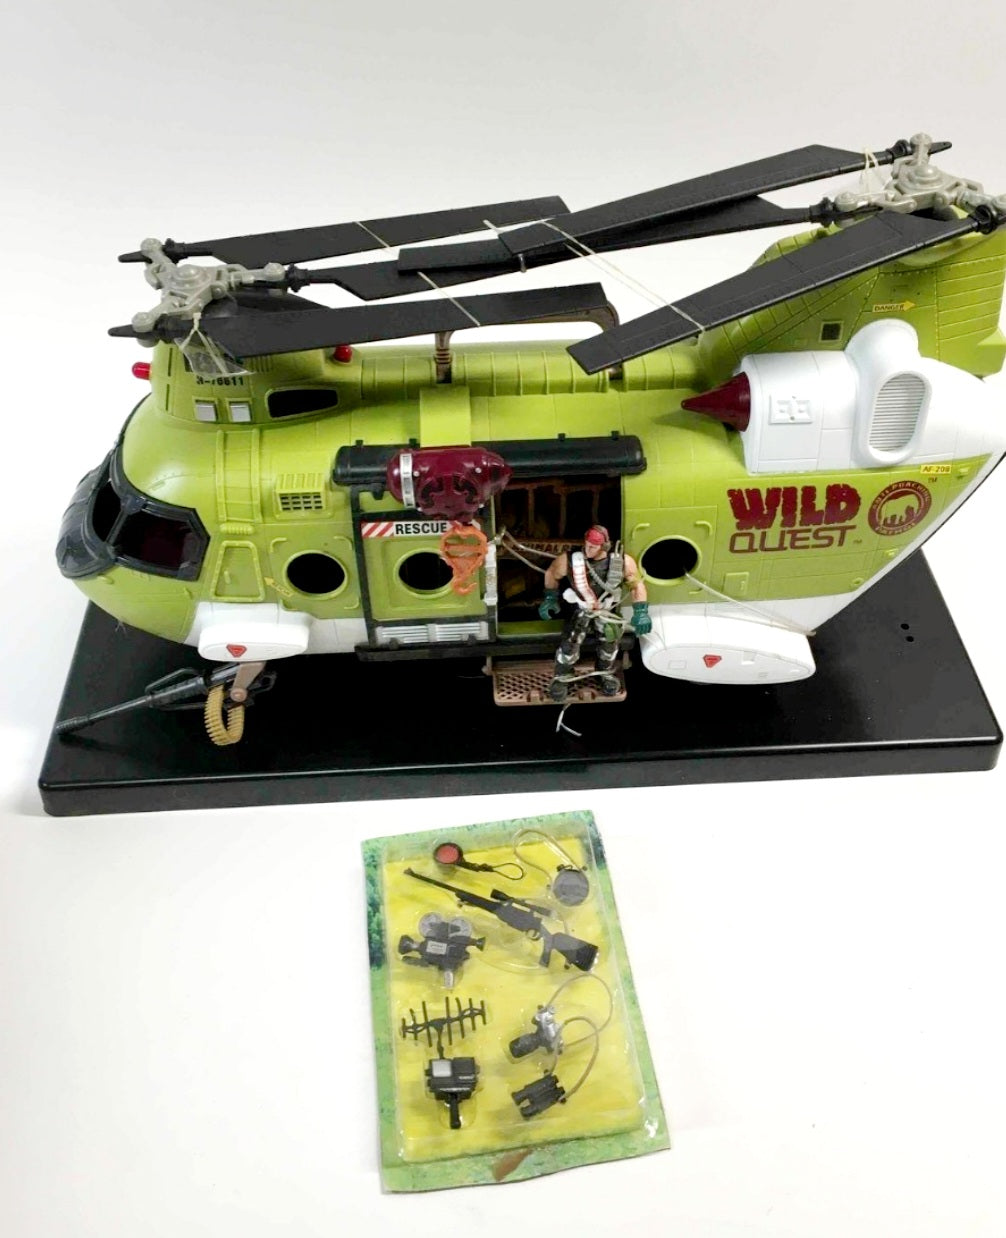 NIB *Wild Quest Helicopter Rescue H-76611